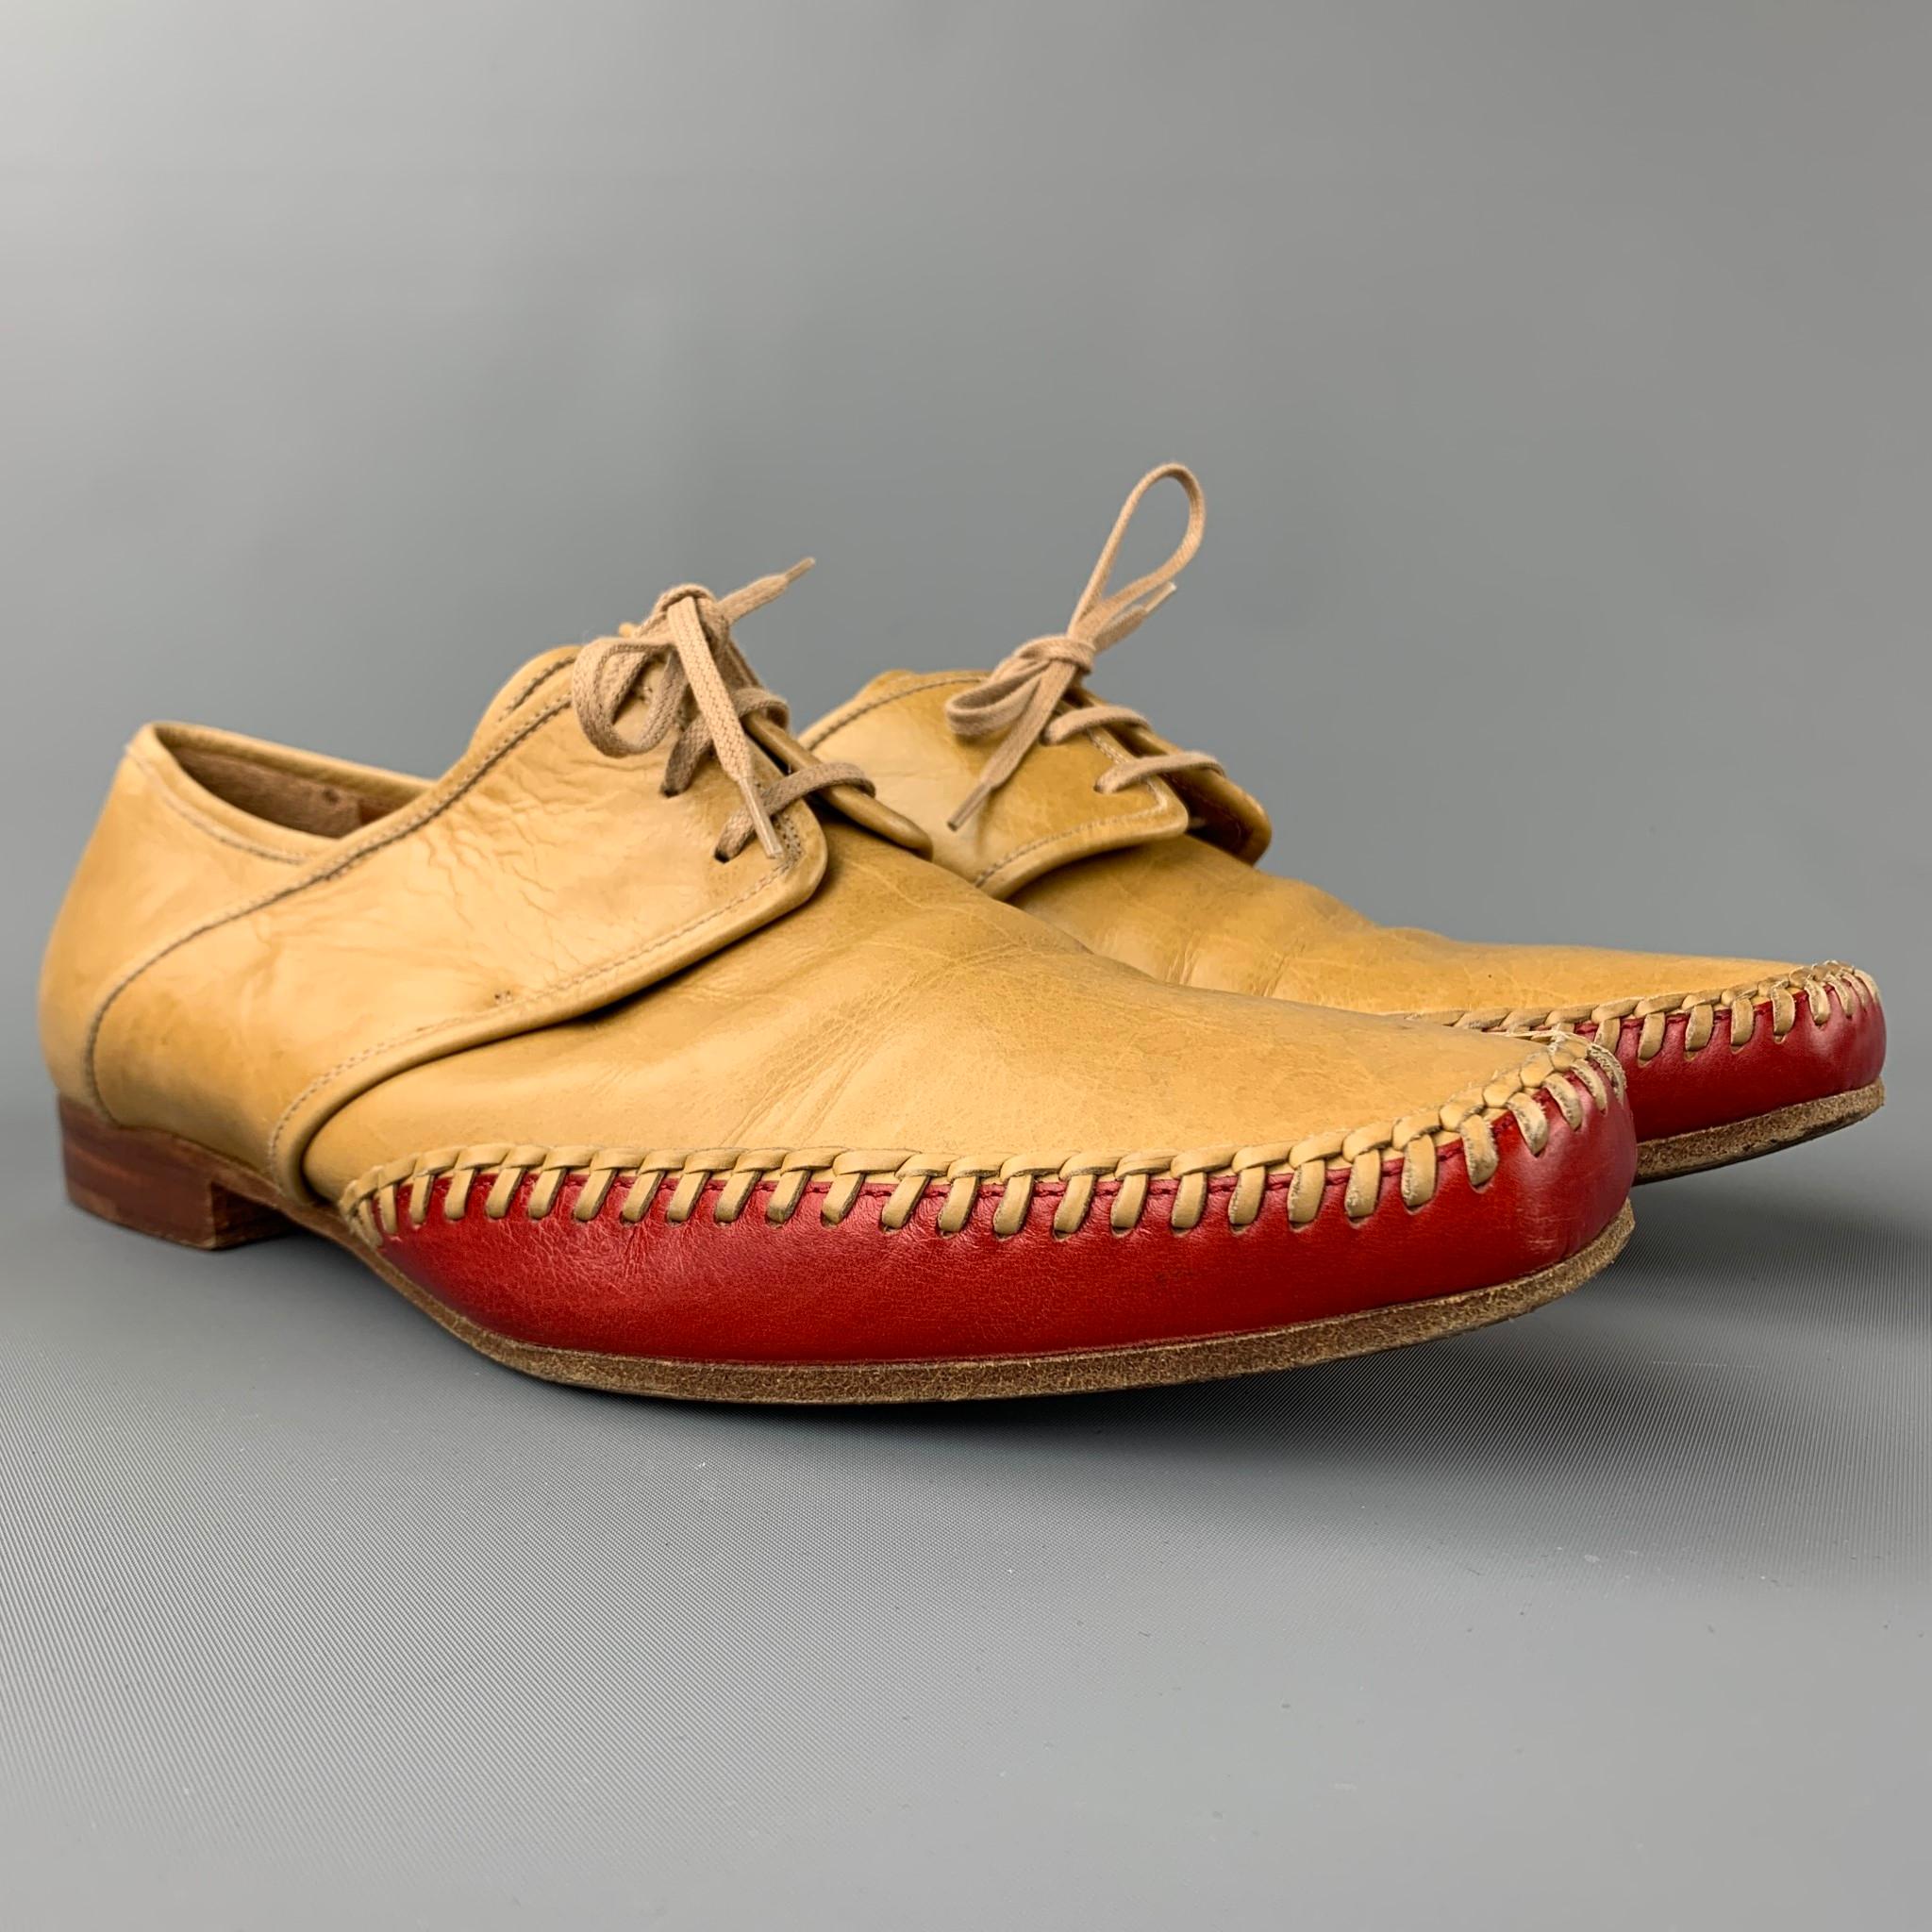 DRIES VAN NOTEN shoes comes in a tan leather with a red trim featuring a square toe, braided detail, wooden sole, and a lace up closure. Moderate wear. Made in Italy.

Good Pre-Owned Condition.
Marked: EU 43

Outsole:

11.5 in. x 3.5 in.